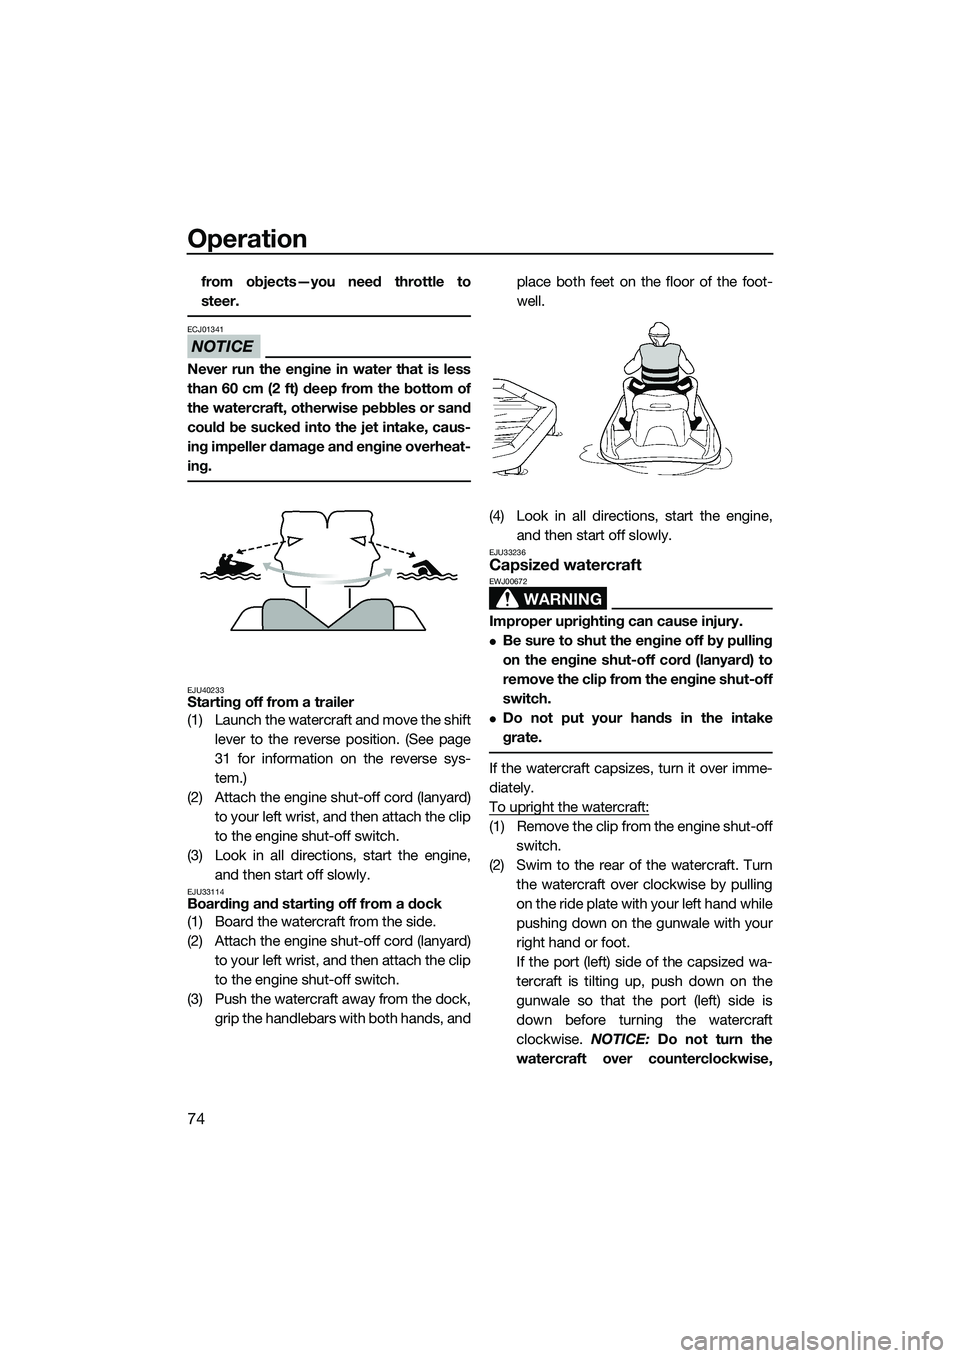 YAMAHA FZR SVHO 2014  Owners Manual Operation
74
from objects—you need throttle to
steer.
NOTICE
ECJ01341
Never run the engine in water that is less
than 60 cm (2 ft) deep from the bottom of
the watercraft, otherwise pebbles or sand
c